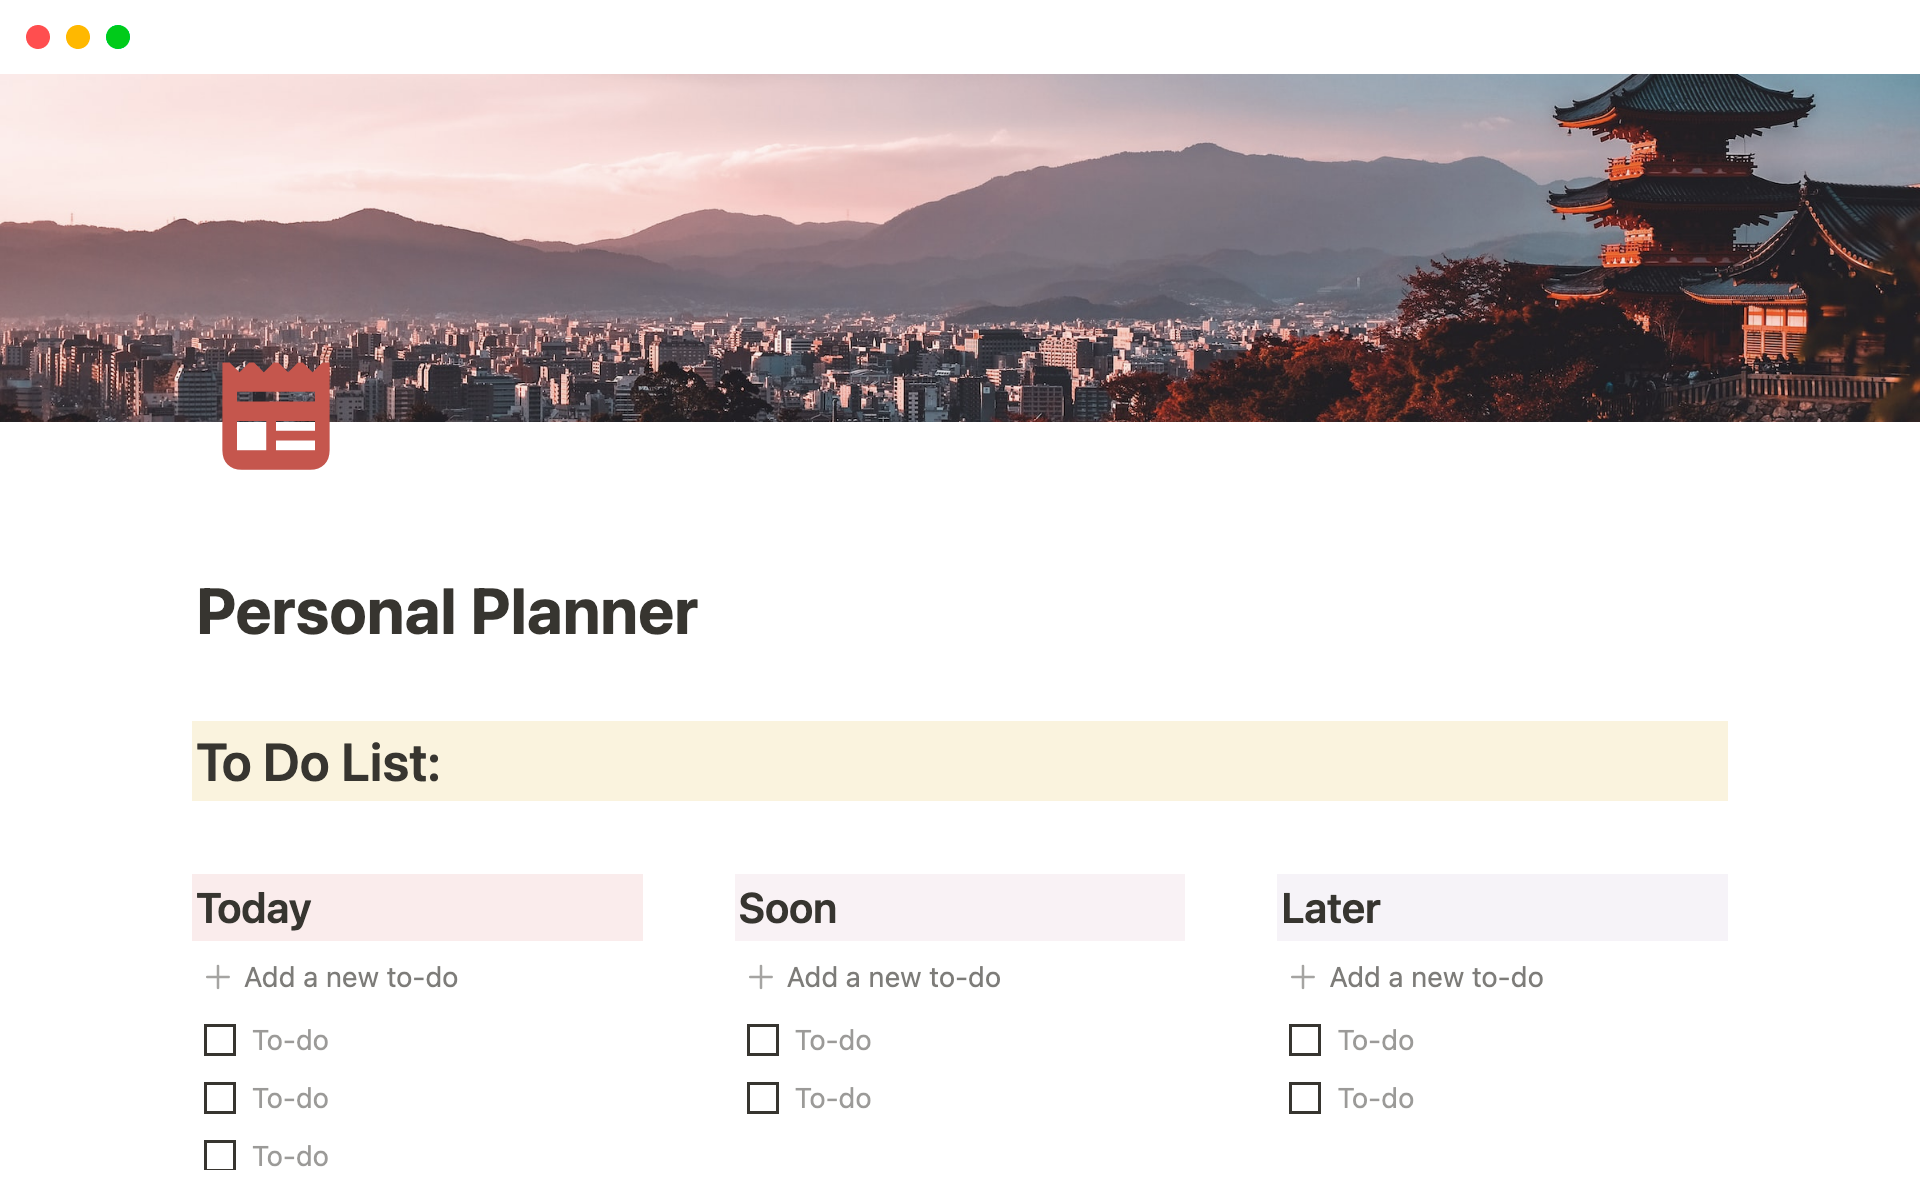 This notion E-Personal Planner template can be used to keep track of your to-do lists, calendar, weekly agenda, etc, it covers all you can find in a traditional personal planner.